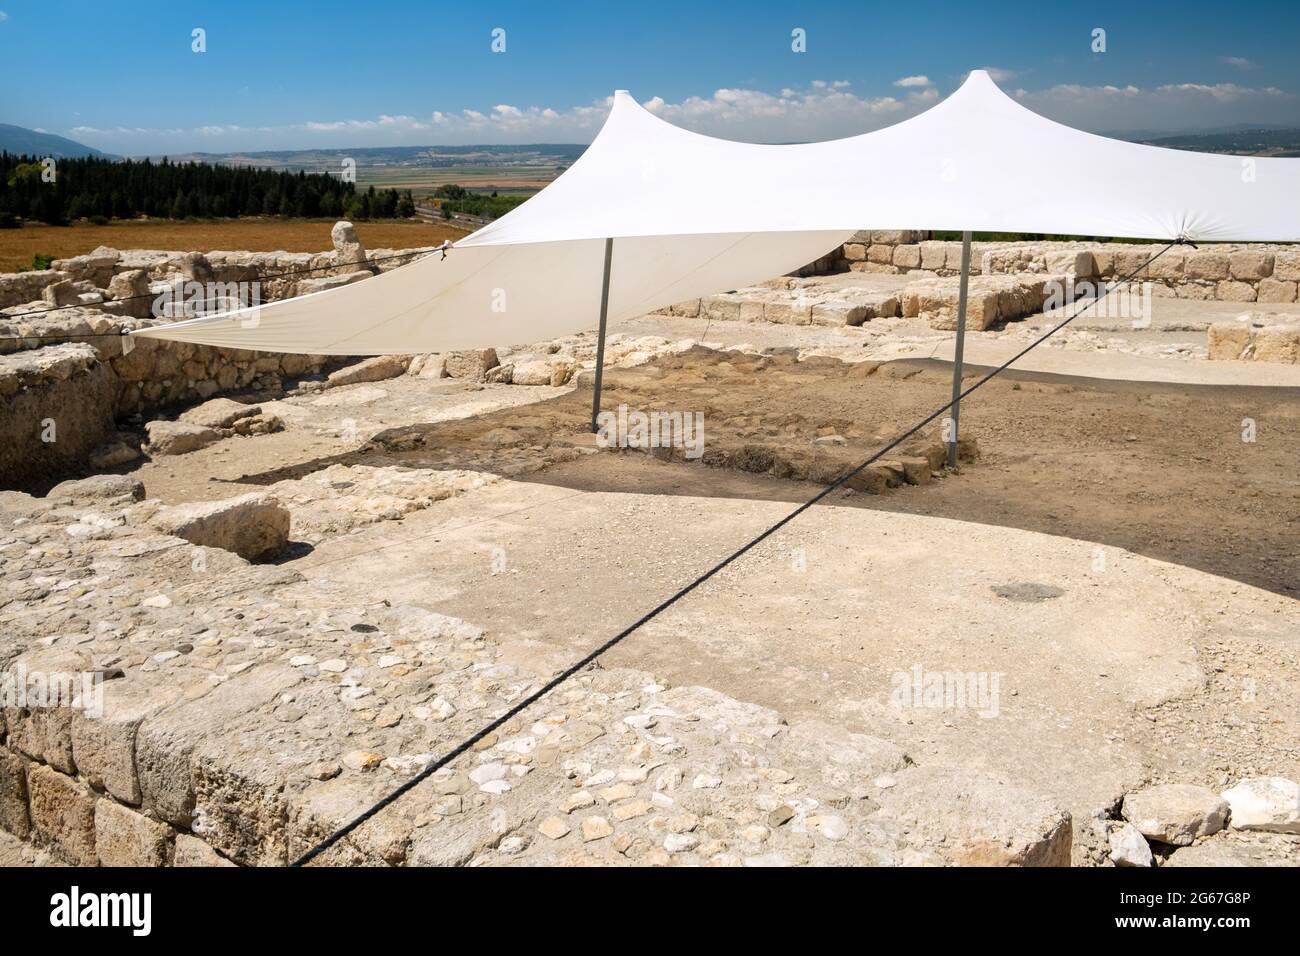 Megido Canaanite and Israelite. High quality photo from Israel Stock Photo